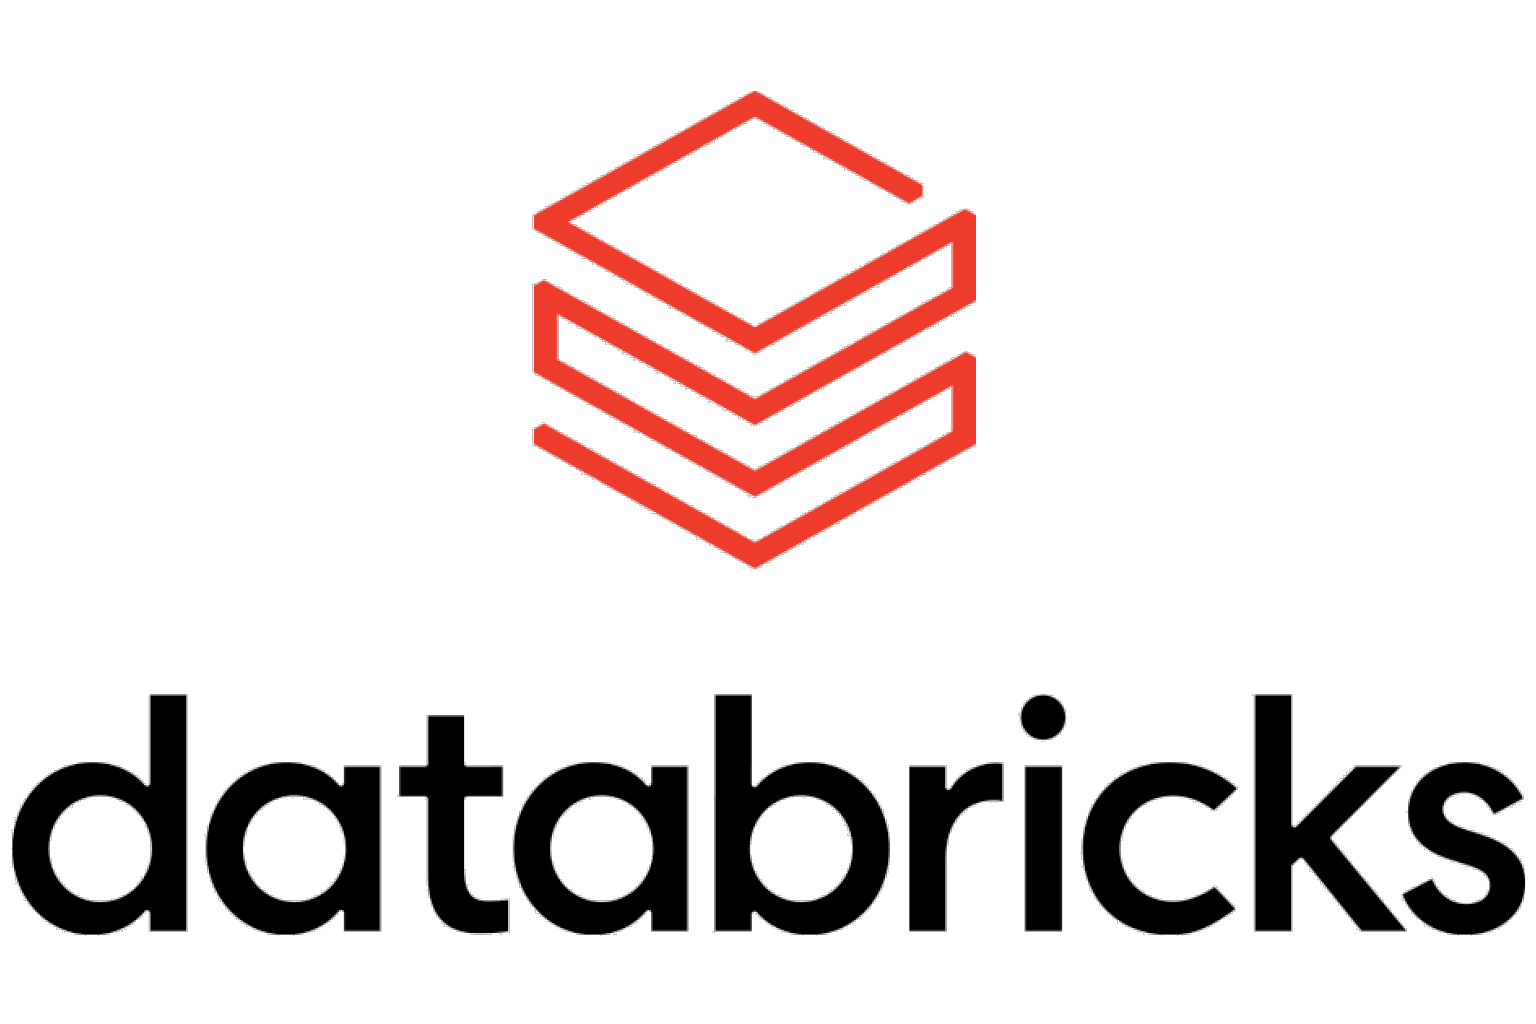 Explore how to use Databricks, a unified data analytics platform, to create compelling visualizations and uncover valuable insights from your data.